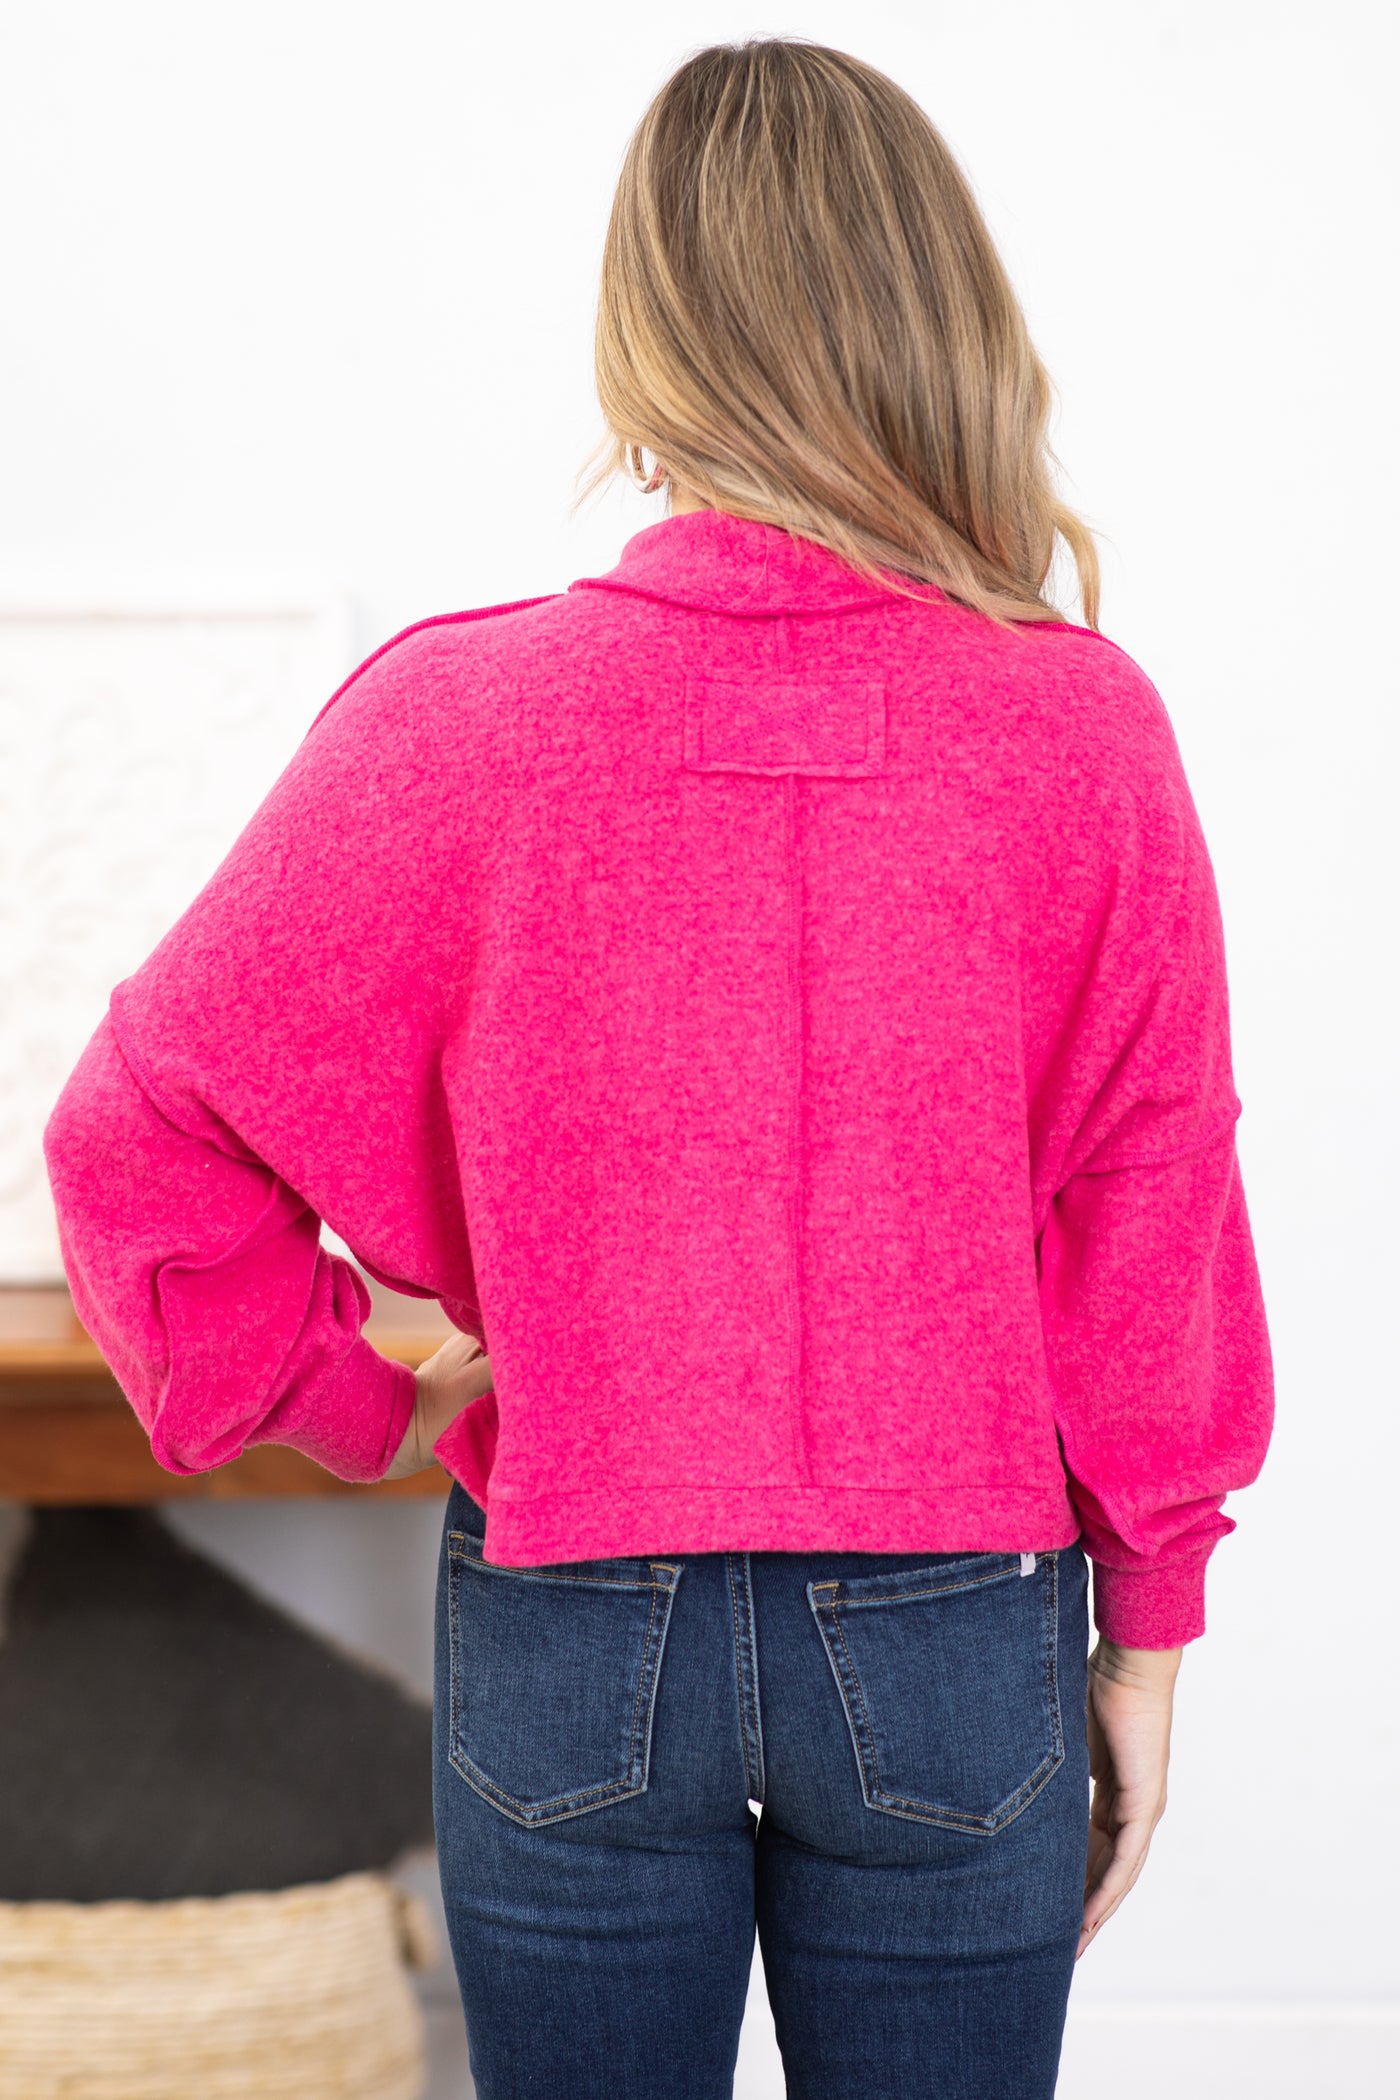 Hot Pink Hacci Knit Mock Neck Top